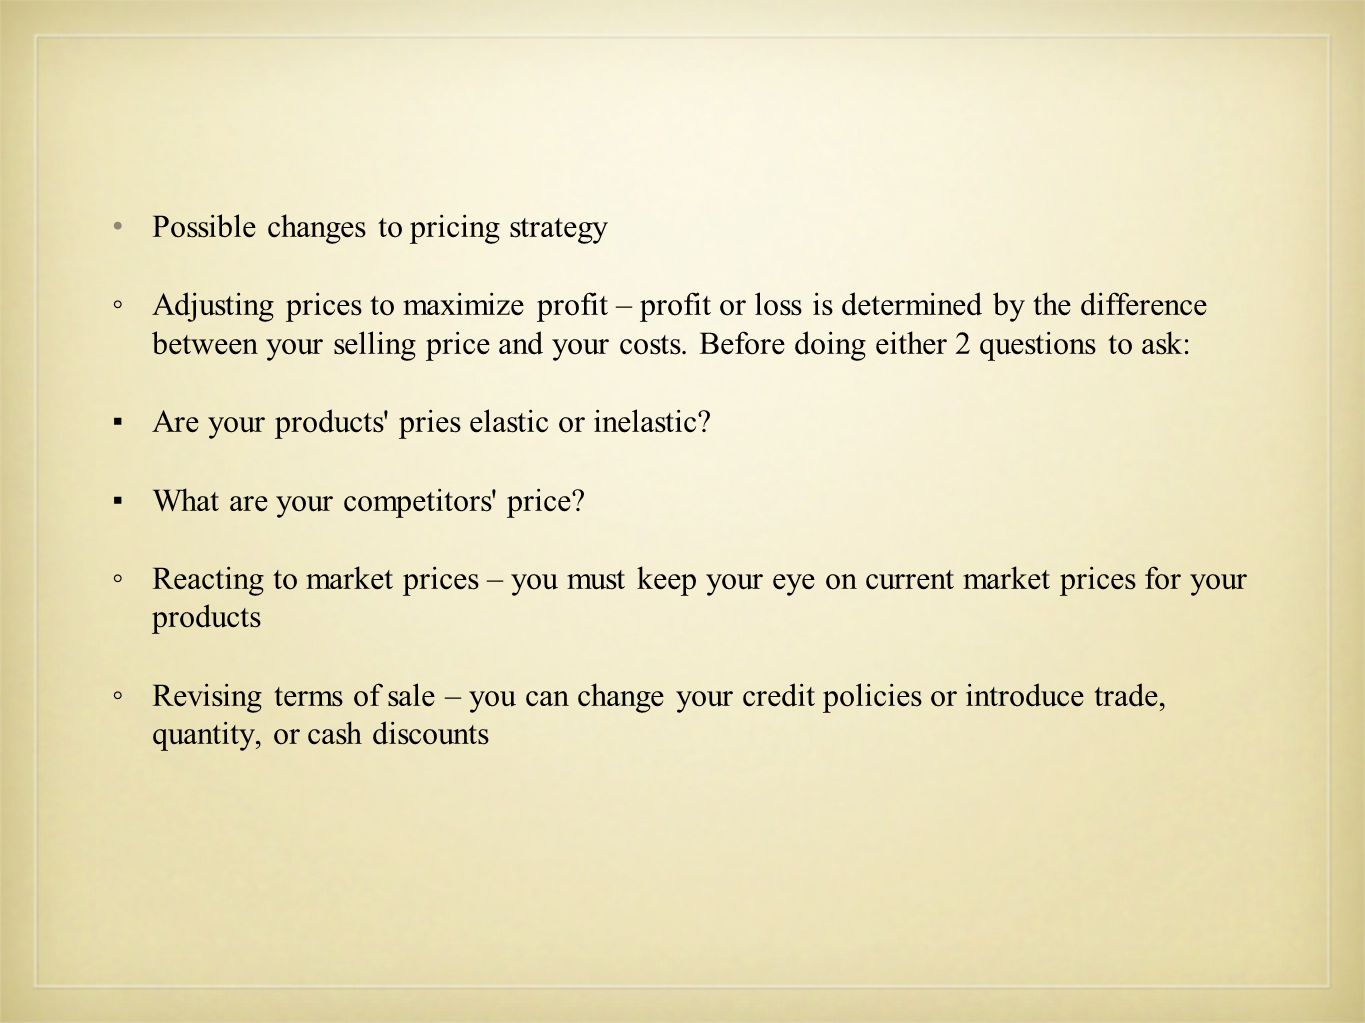 Possible changes to pricing strategy